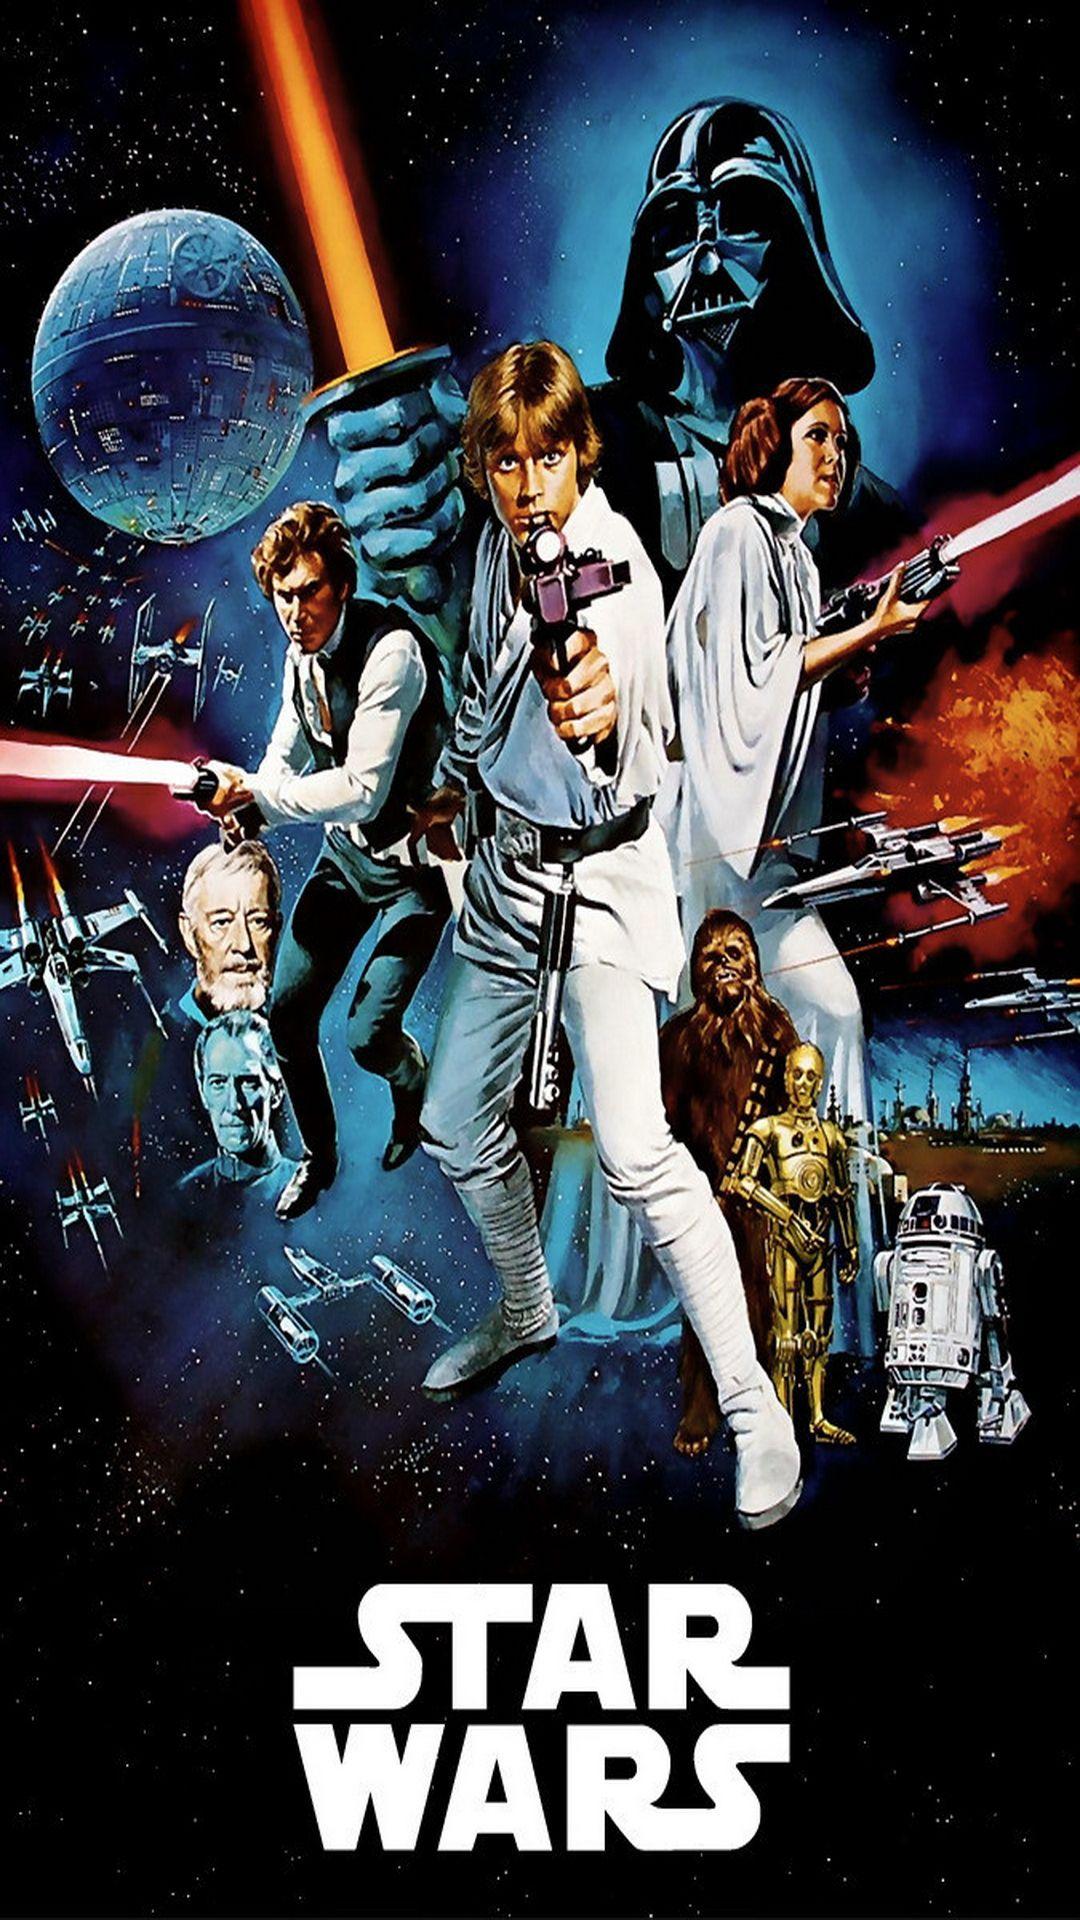 Here's 10 Movie Posters Wallpaper for the iPhone 6 Plus!. Star wars movies posters, Star wars episodes, Vintage star wars